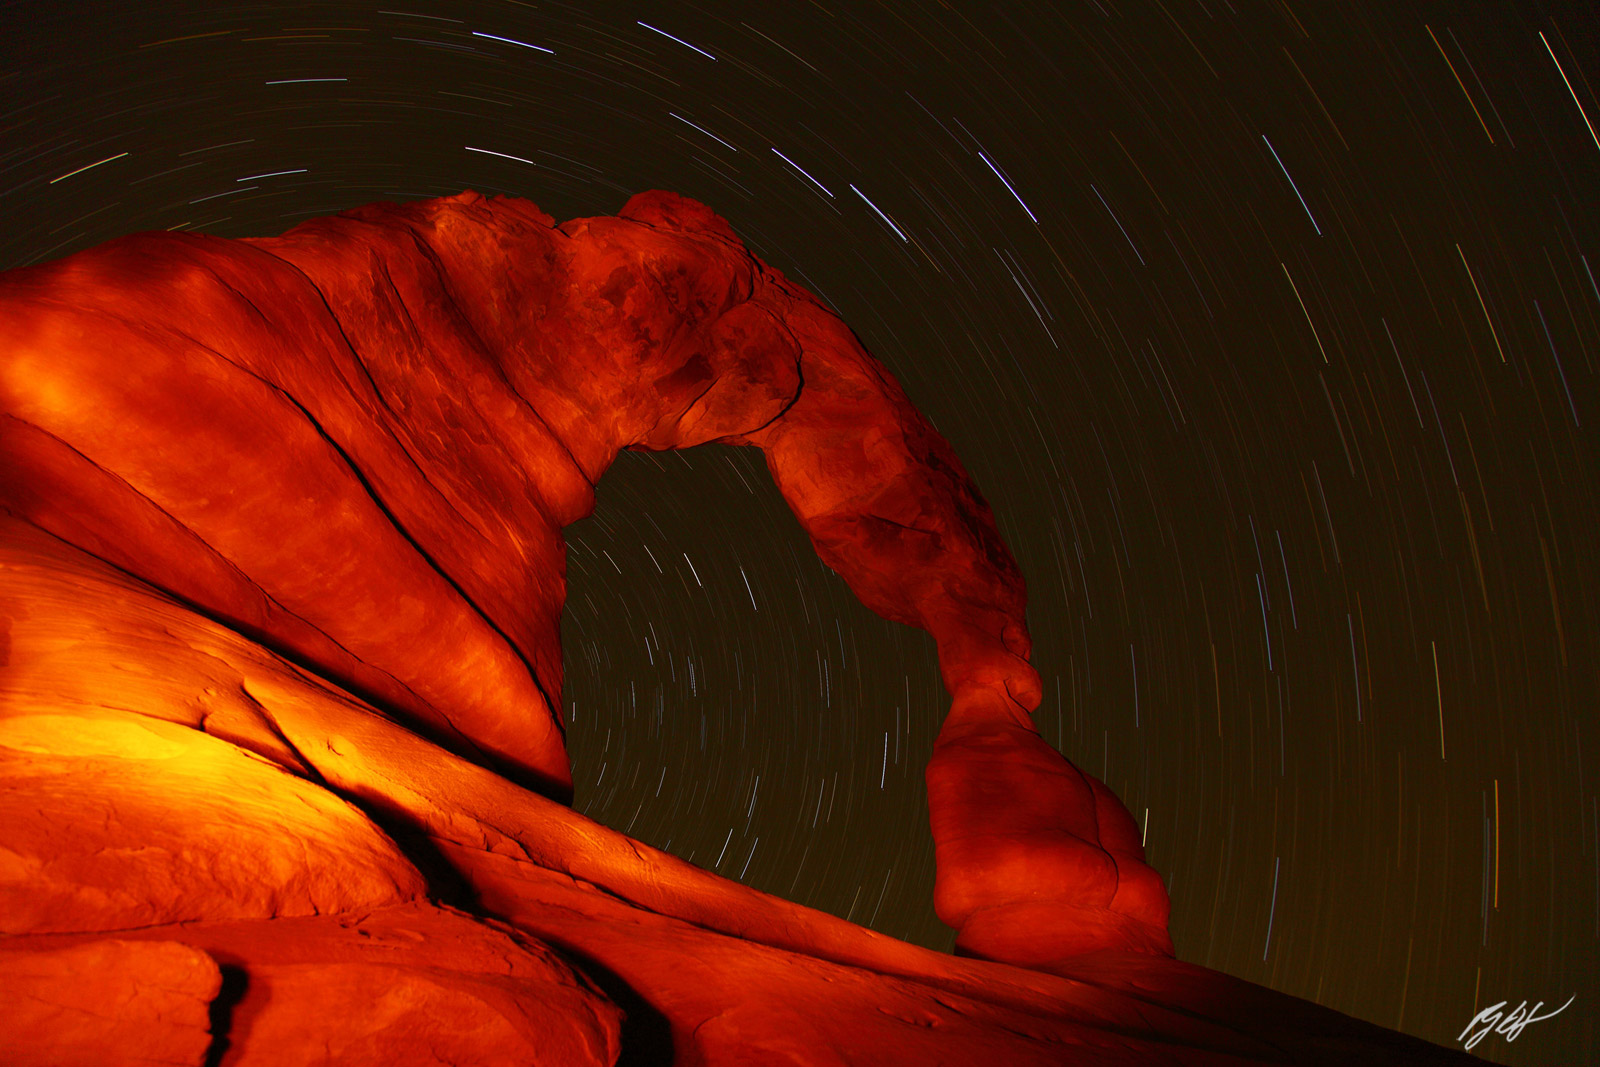 Star Trails and the Delicate Arch in Arches National Park in Utah